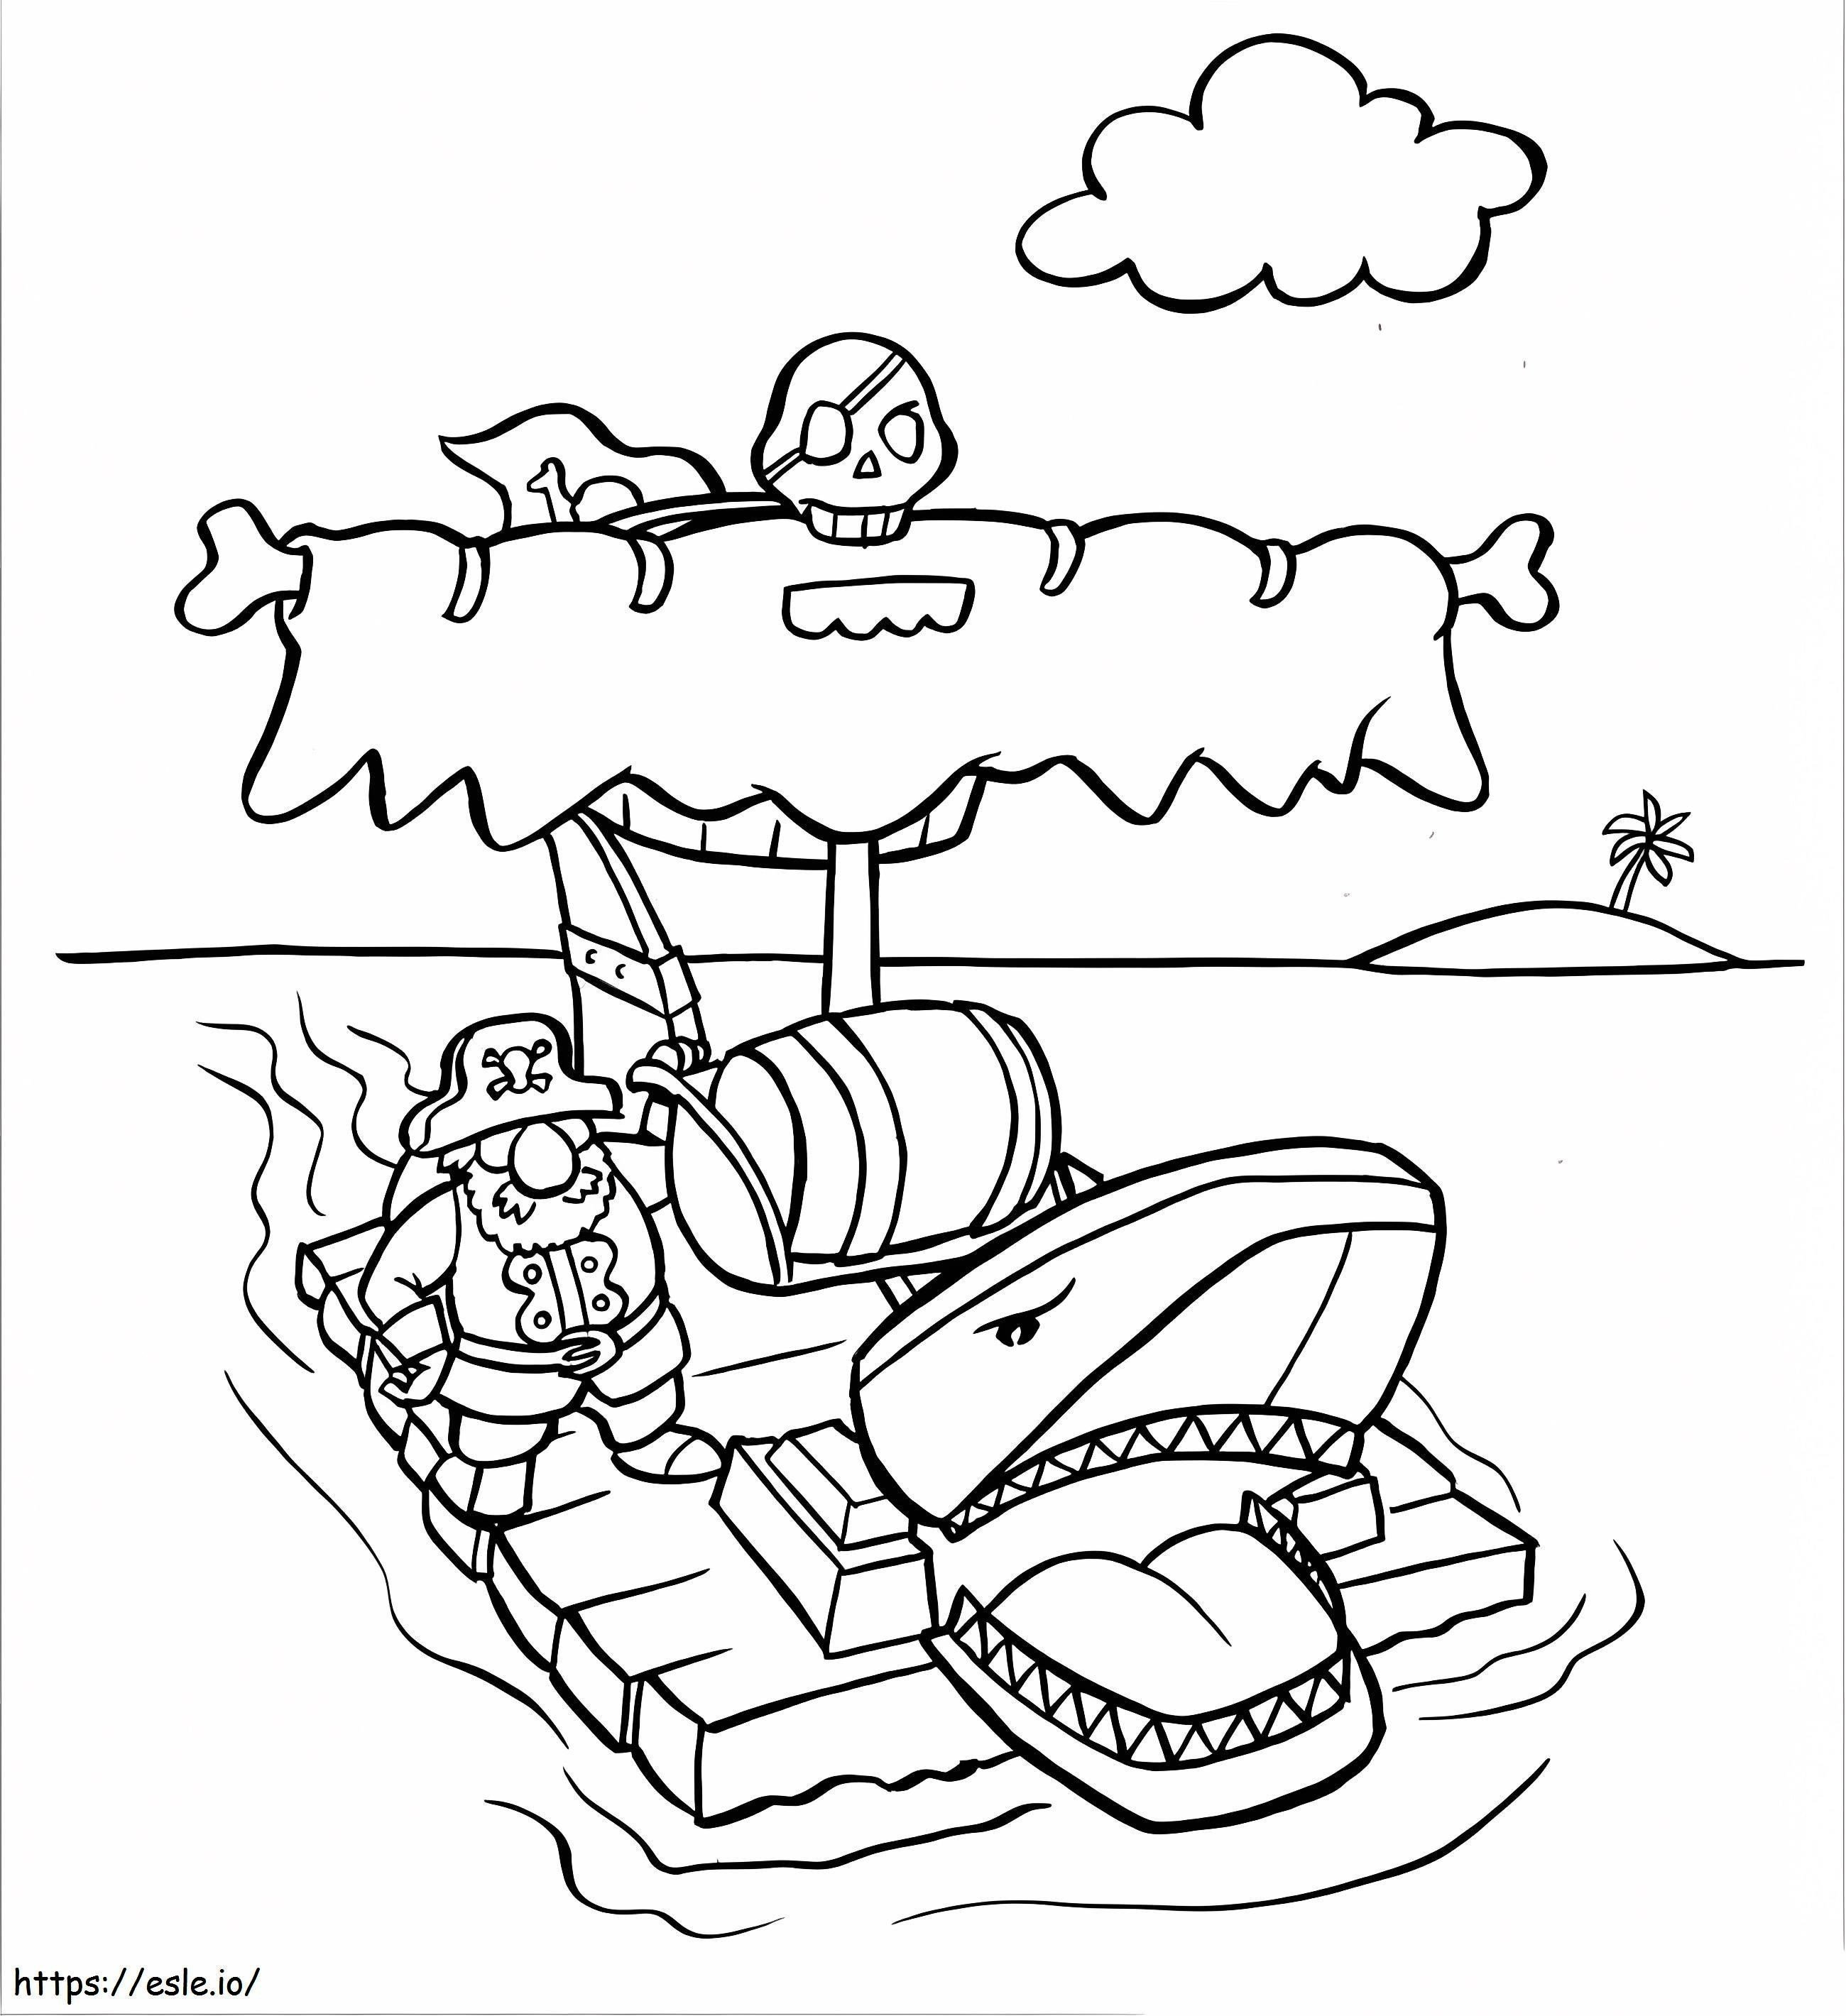 Pirate On Raft coloring page